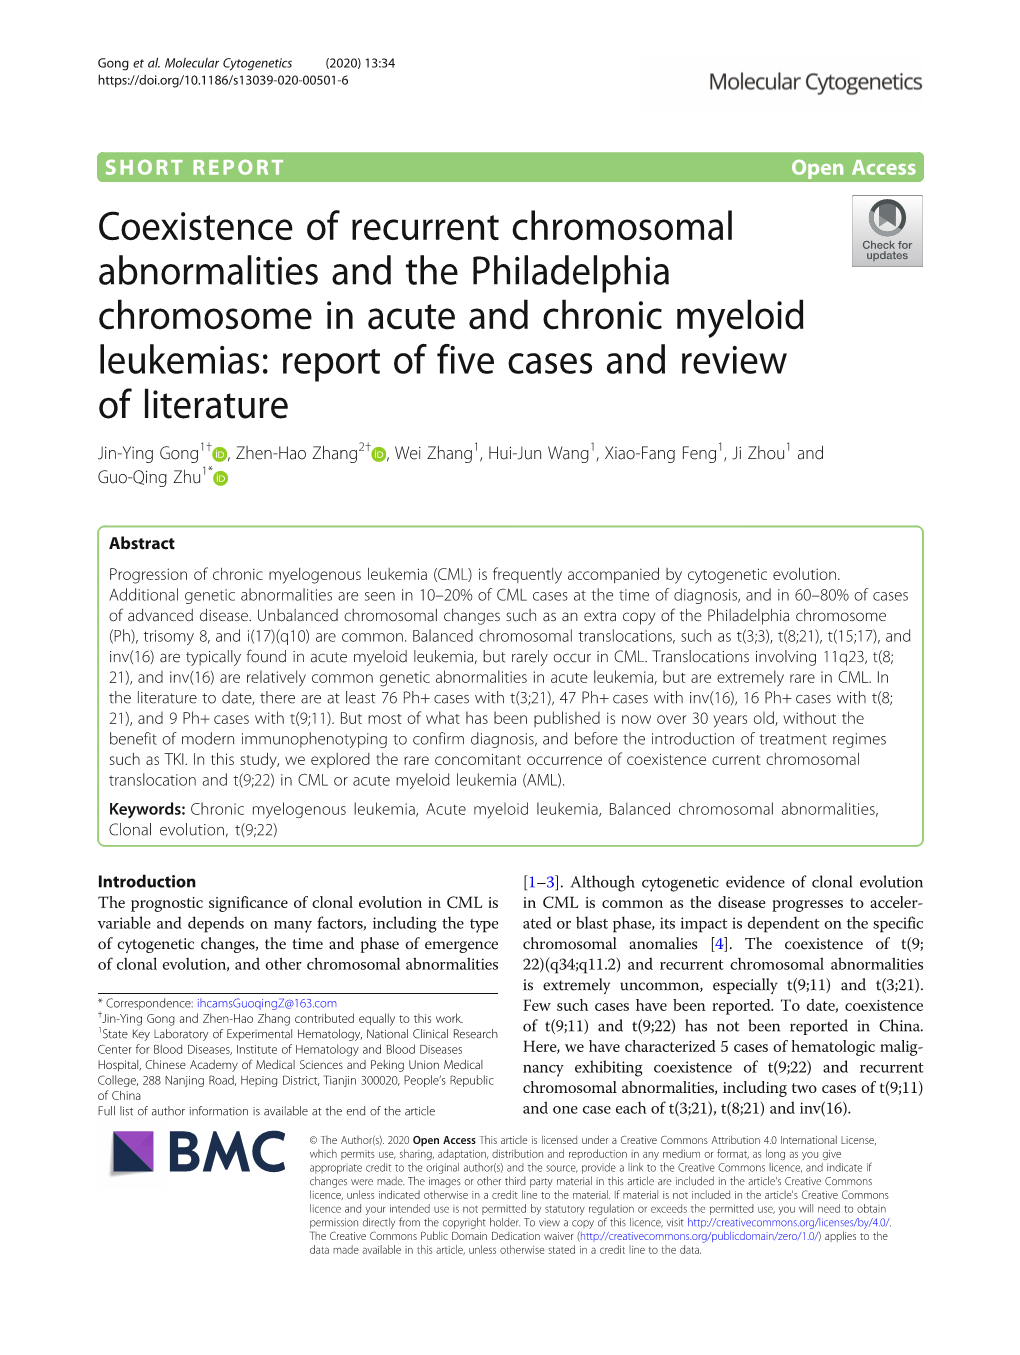 Coexistence of Recurrent Chromosomal Abnormalities and the Philadelphia Chromosome in Acute and Chronic Myeloid Leukemias